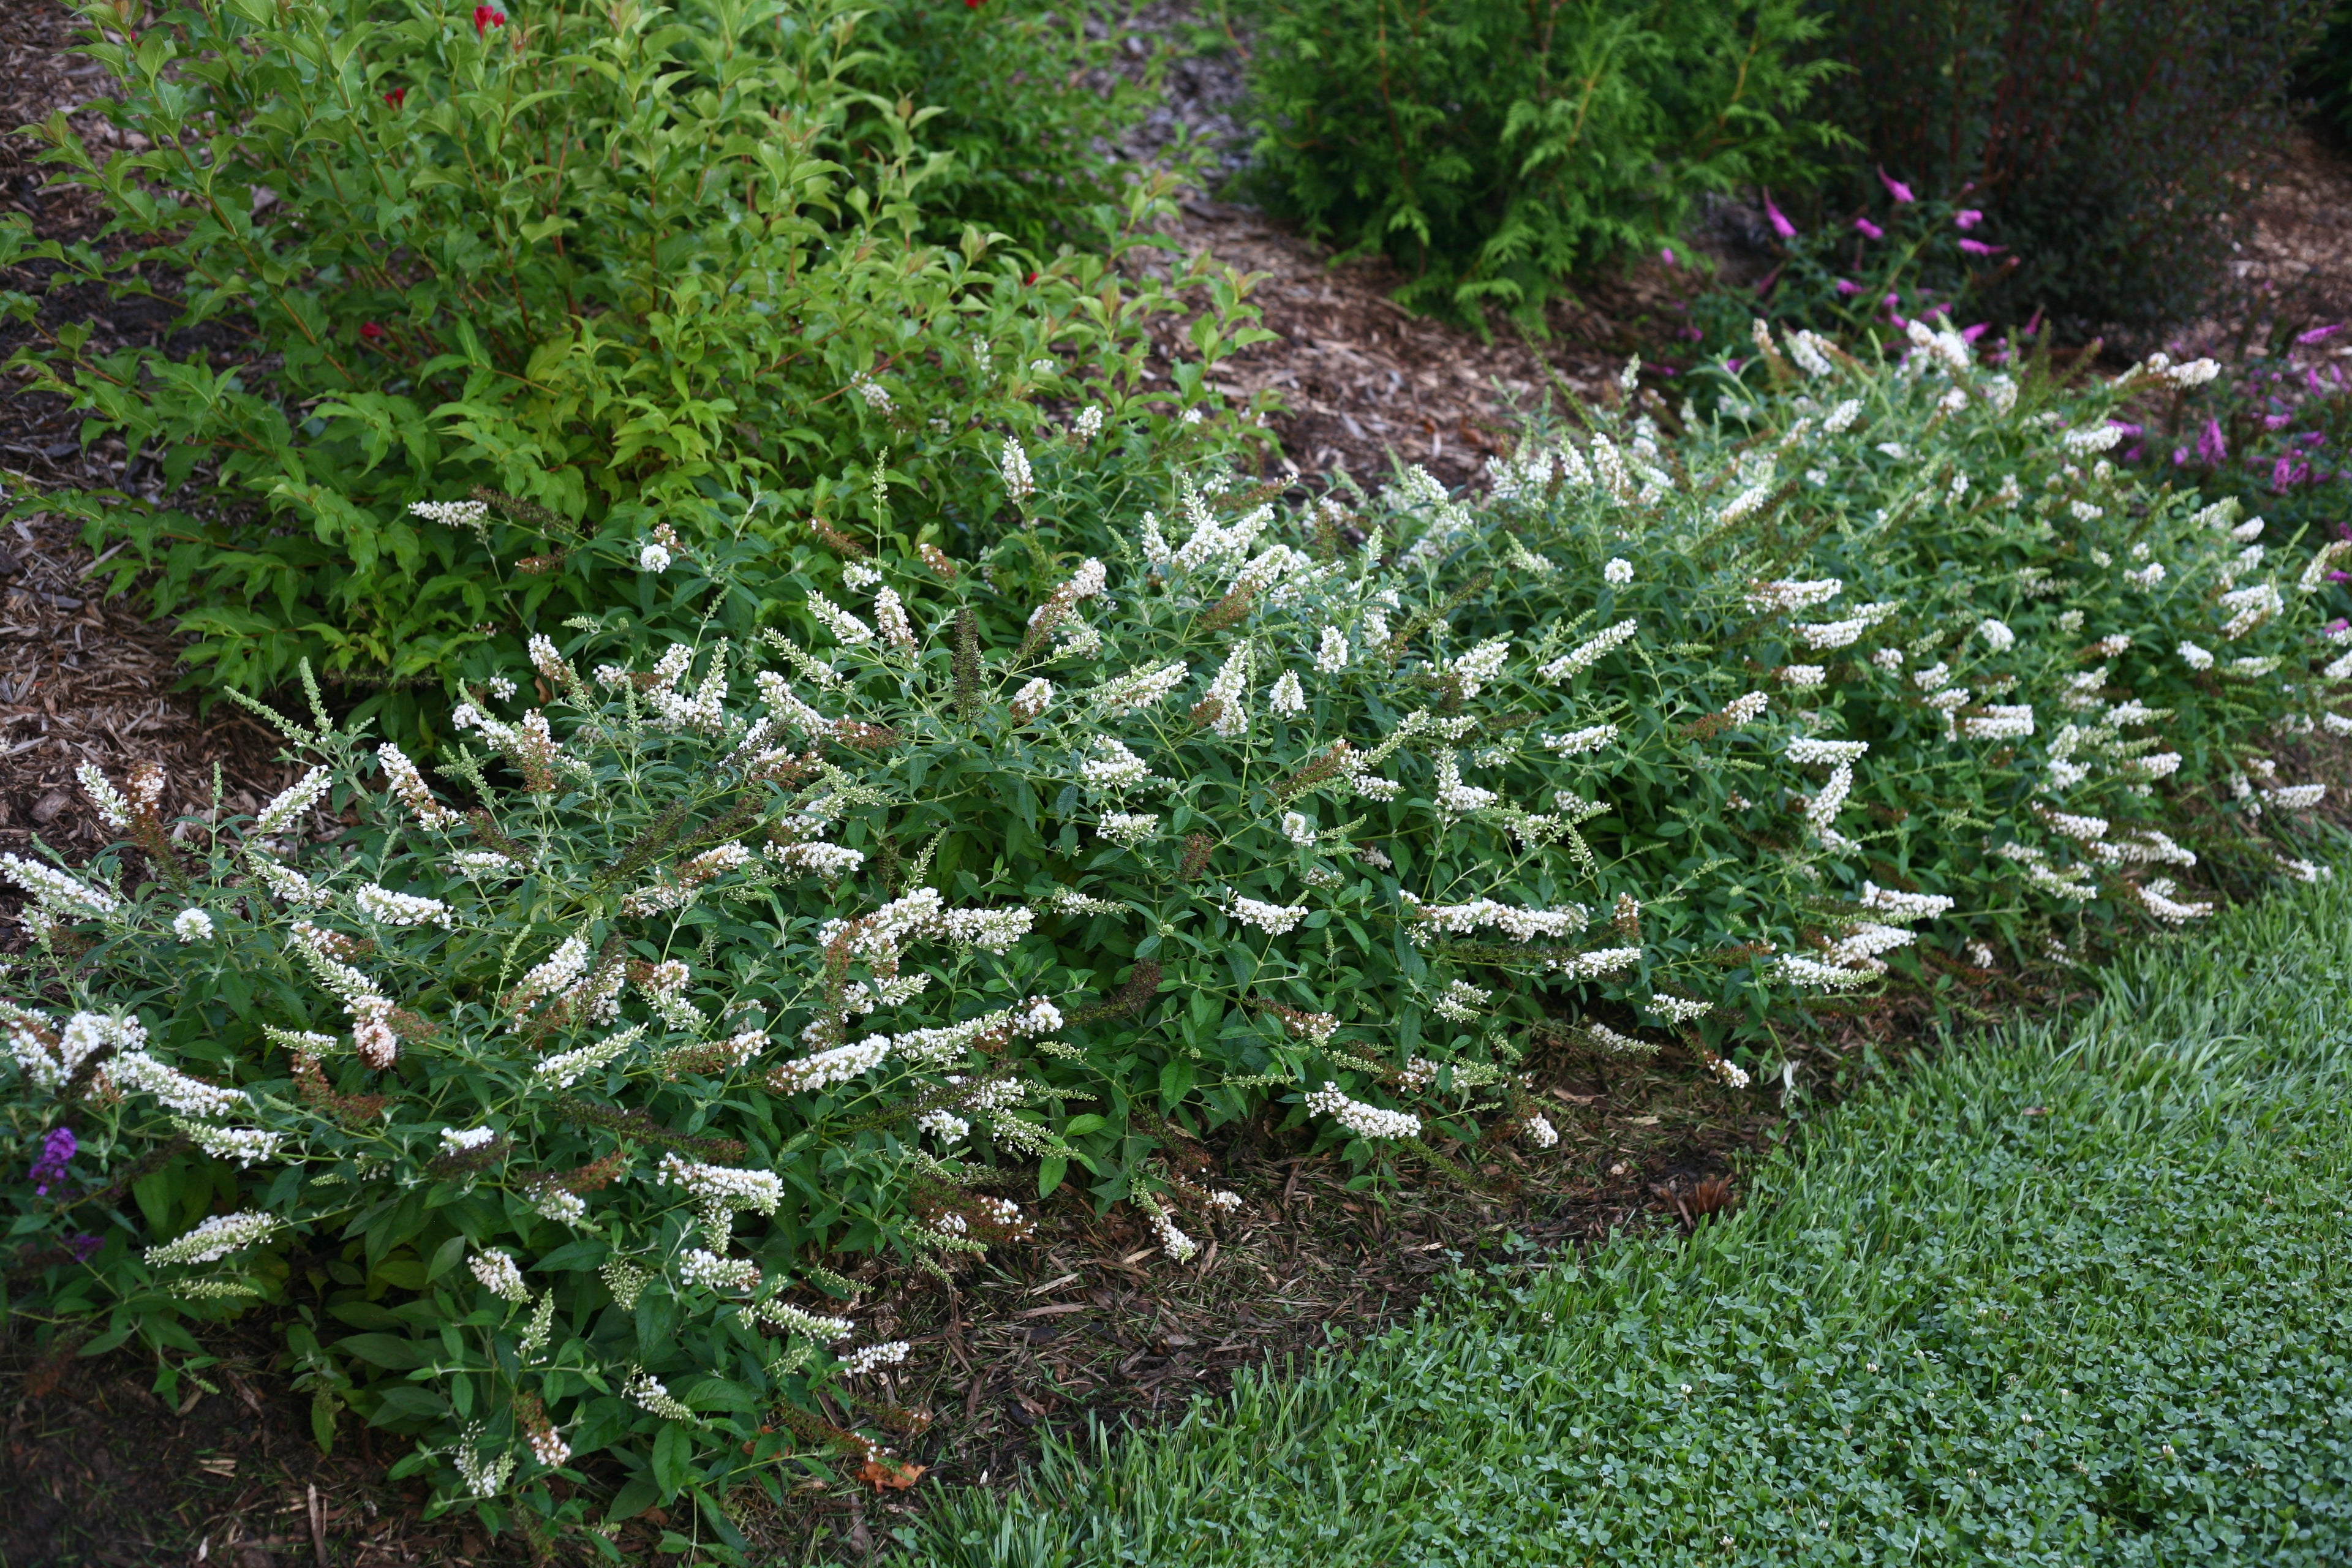 Three Ice Chip butterfly bush plants blooming with white flower spikes